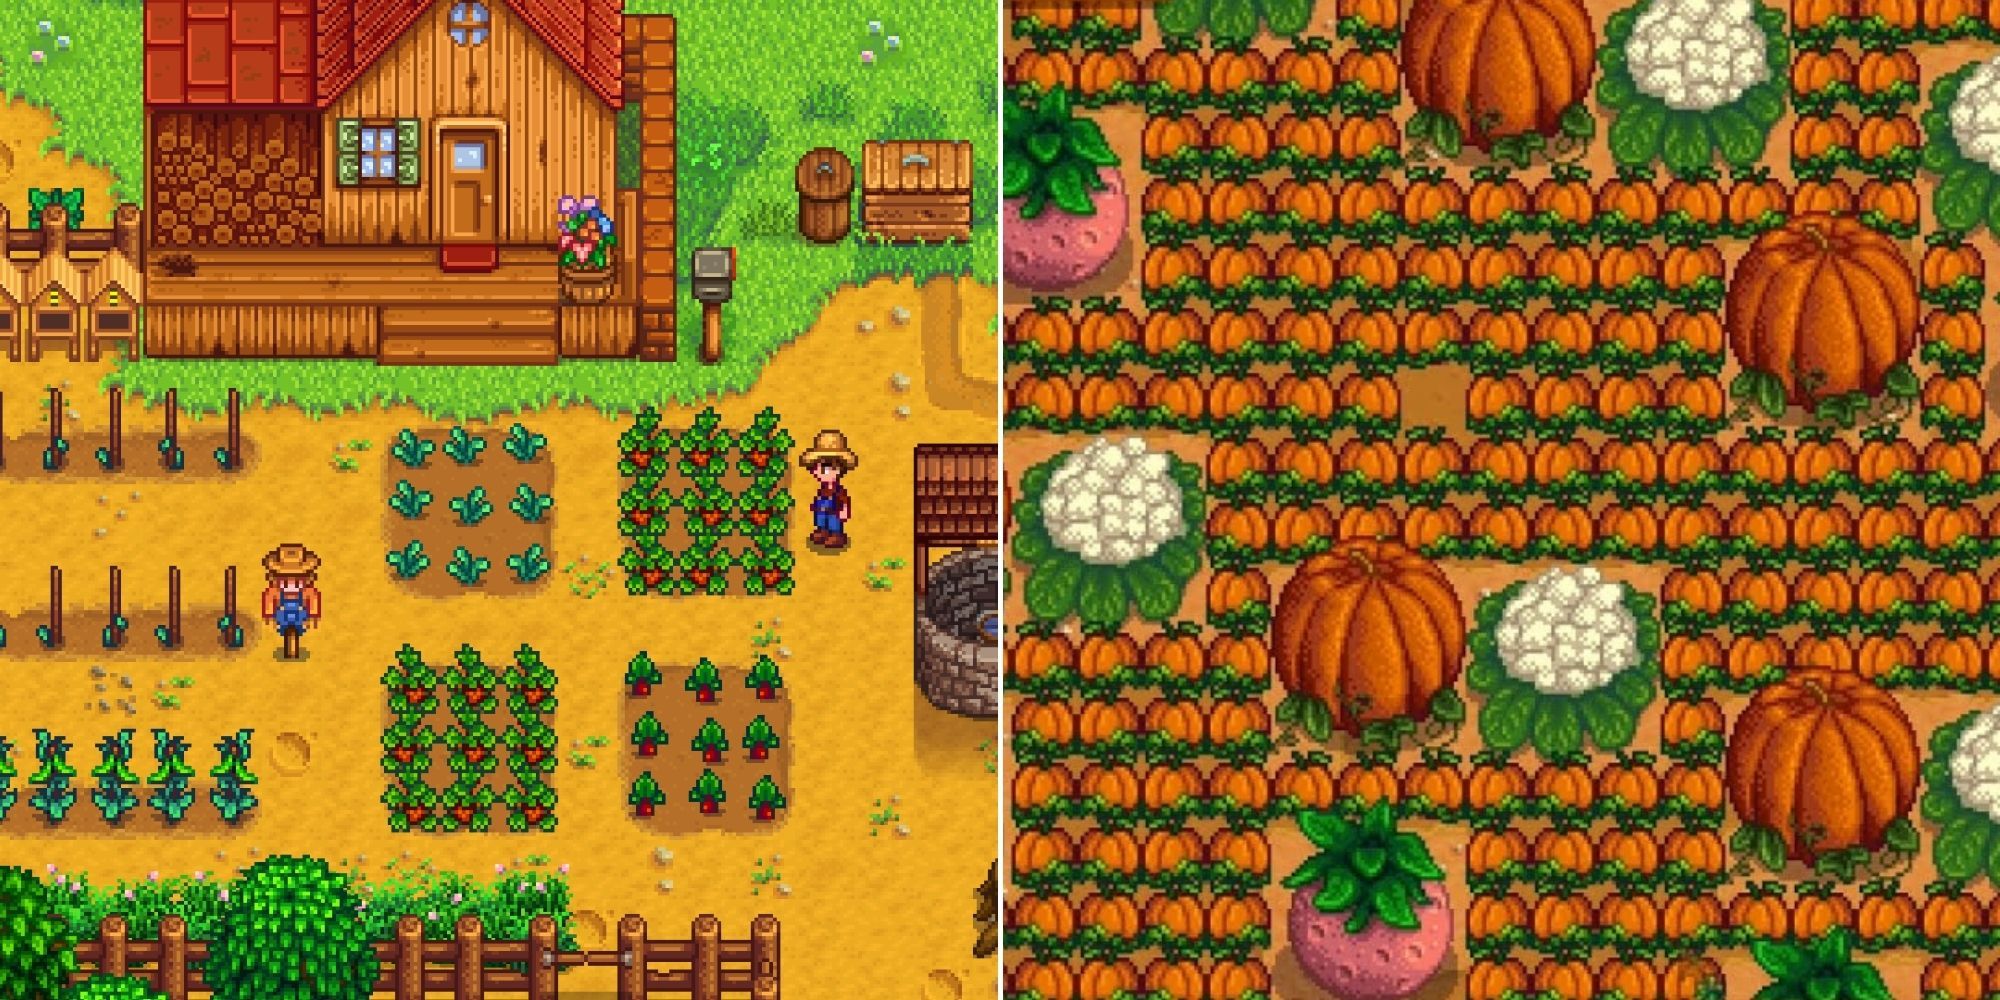 A simple farm set up and lots of giant crops in Stardew Valley